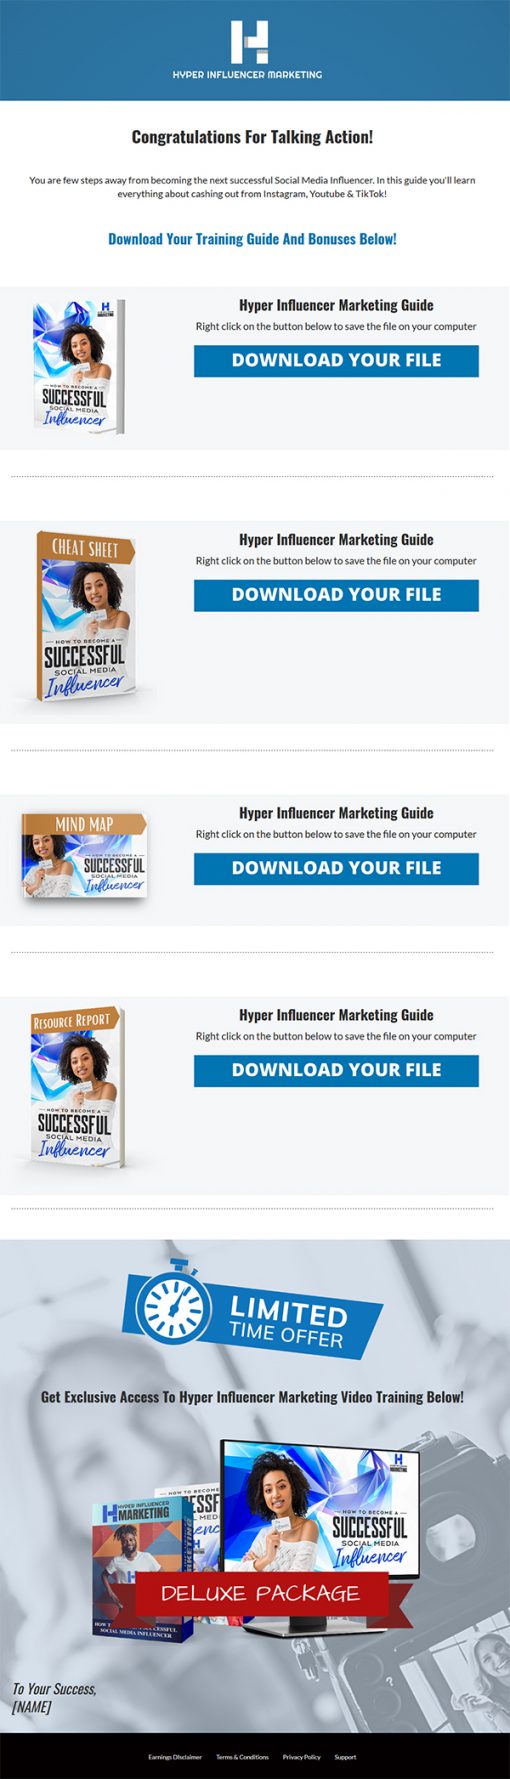 Become a Successful Social Media Influencer Ebook and Videos MRR